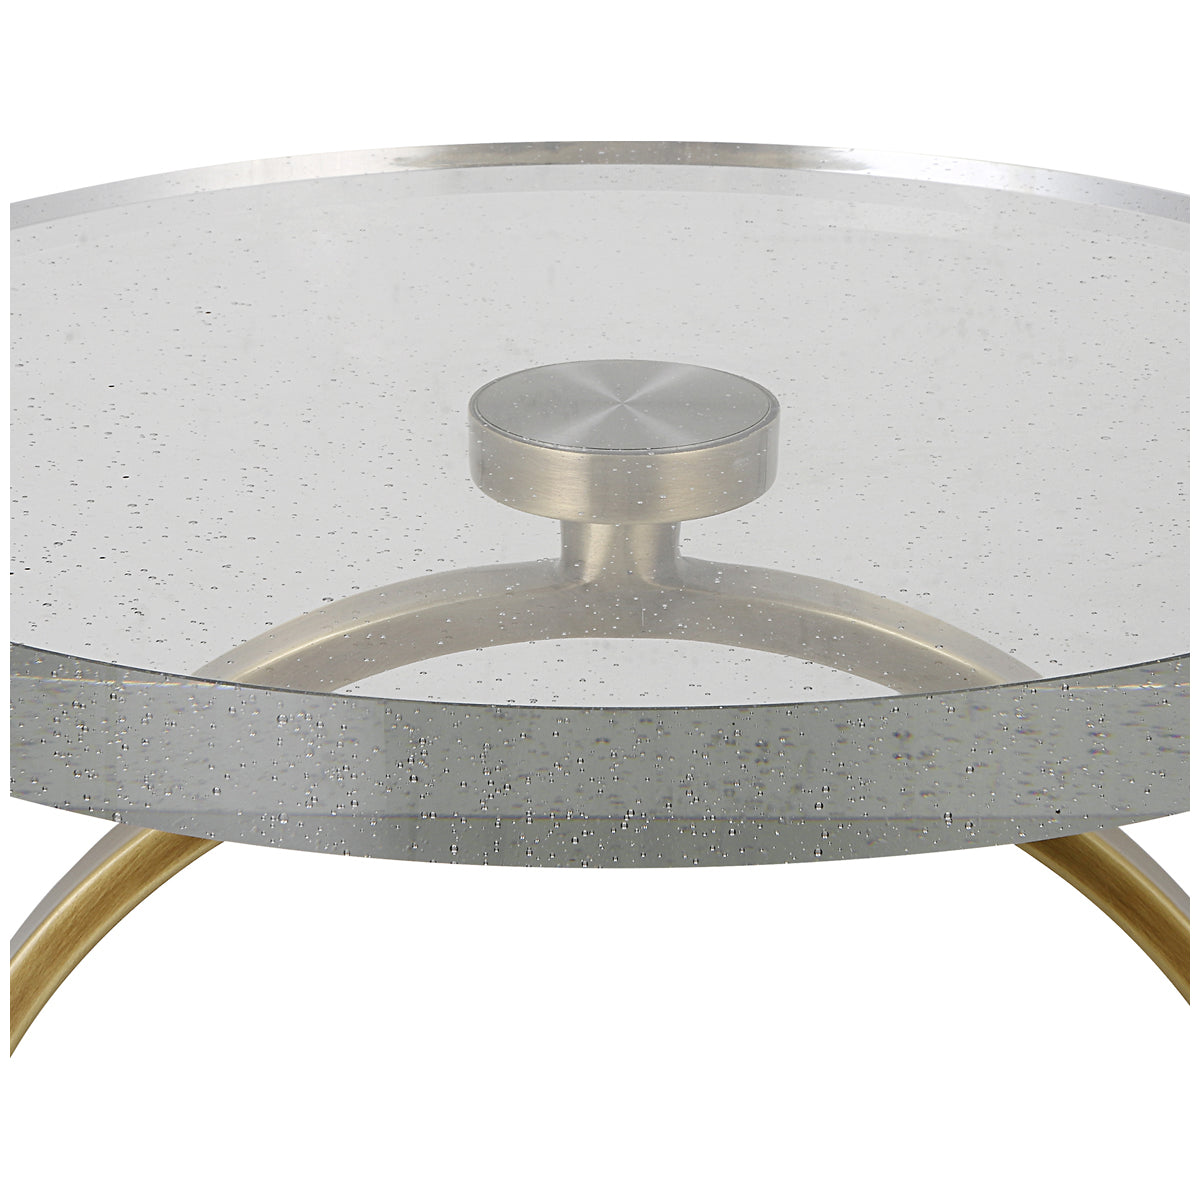 Uttermost Ringlet Brass Accent Table